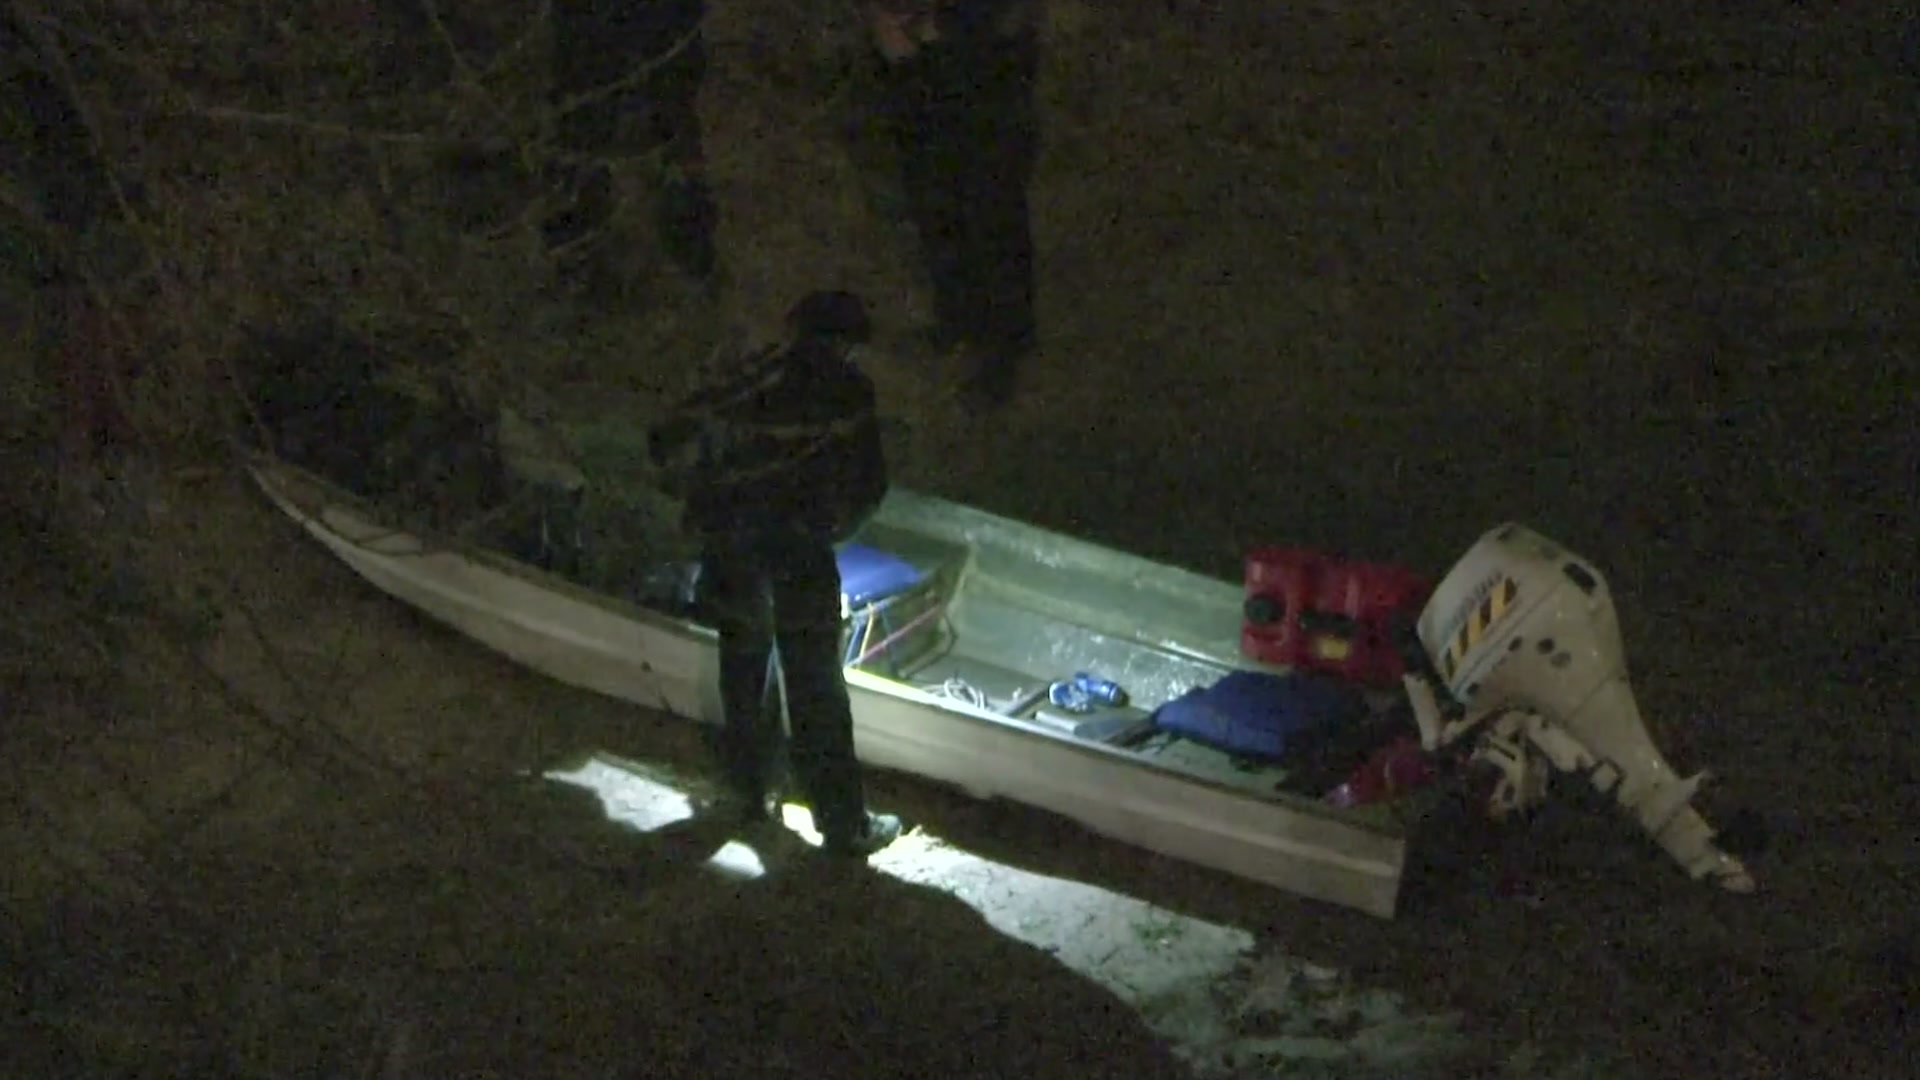 Houston Museum Intruders Use Getaway Boat, Disappear Into City's Storm
Drains